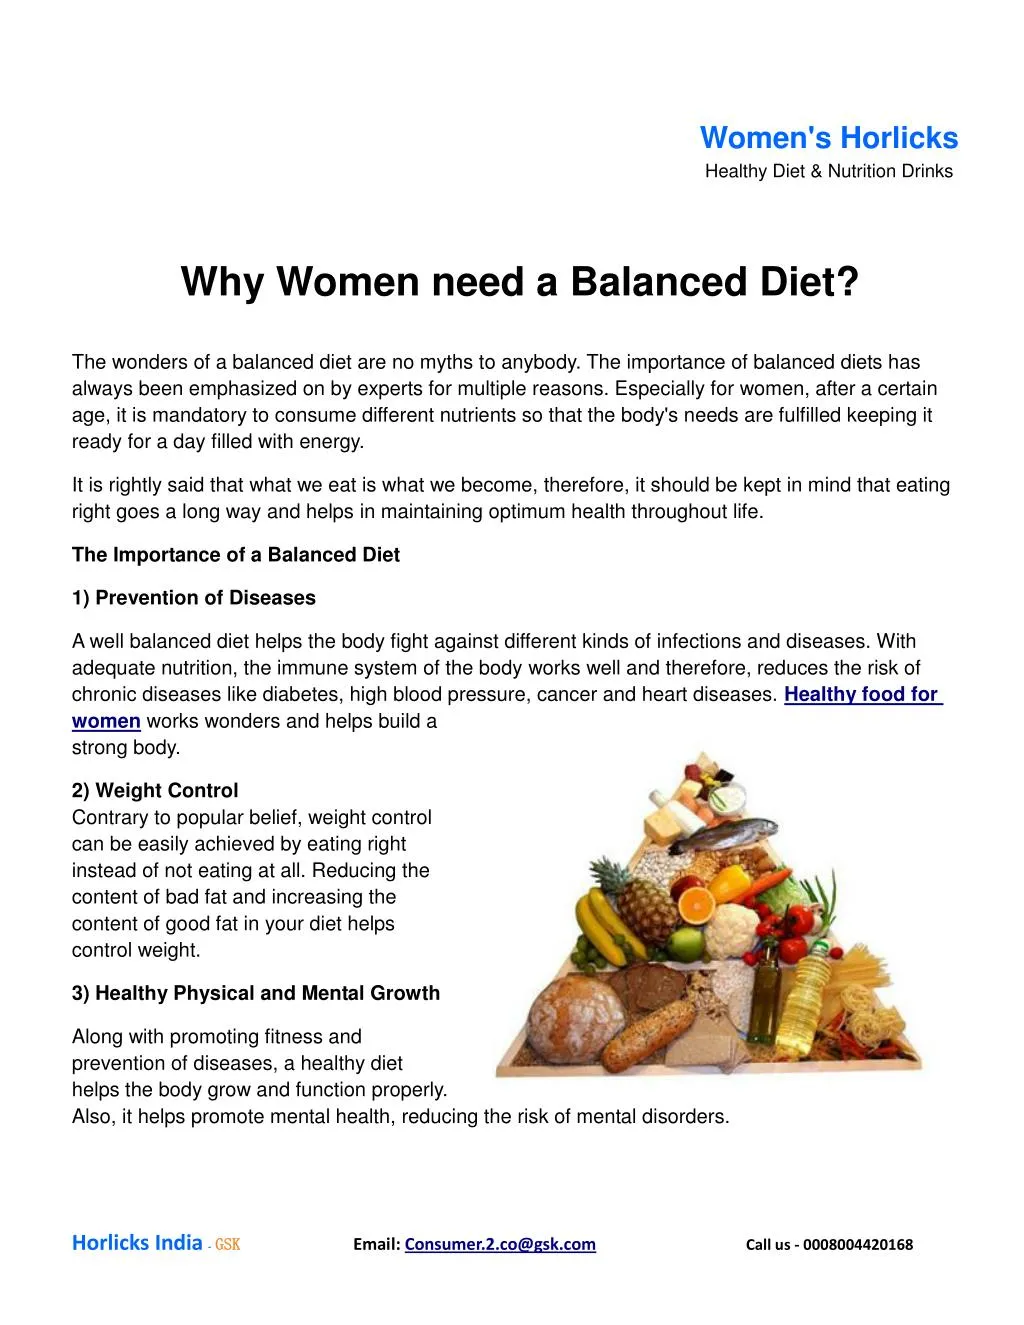 What is a balanced diet for women?